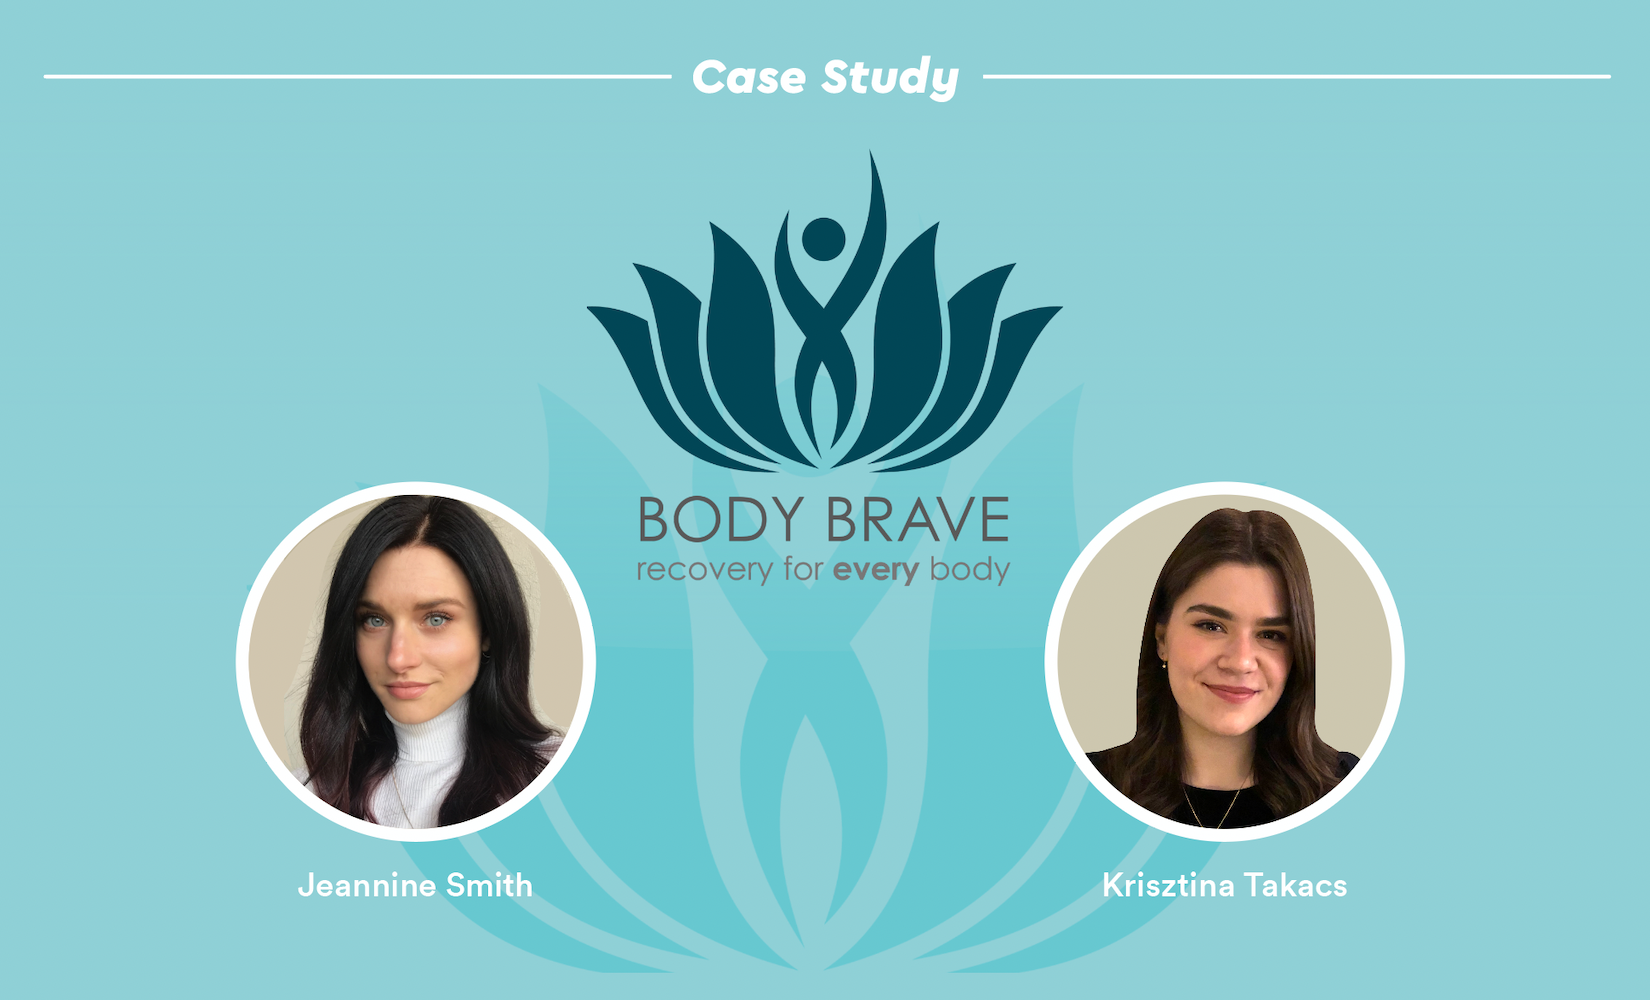 Body Brave improves healthcare access and services with Jotform Enterprise